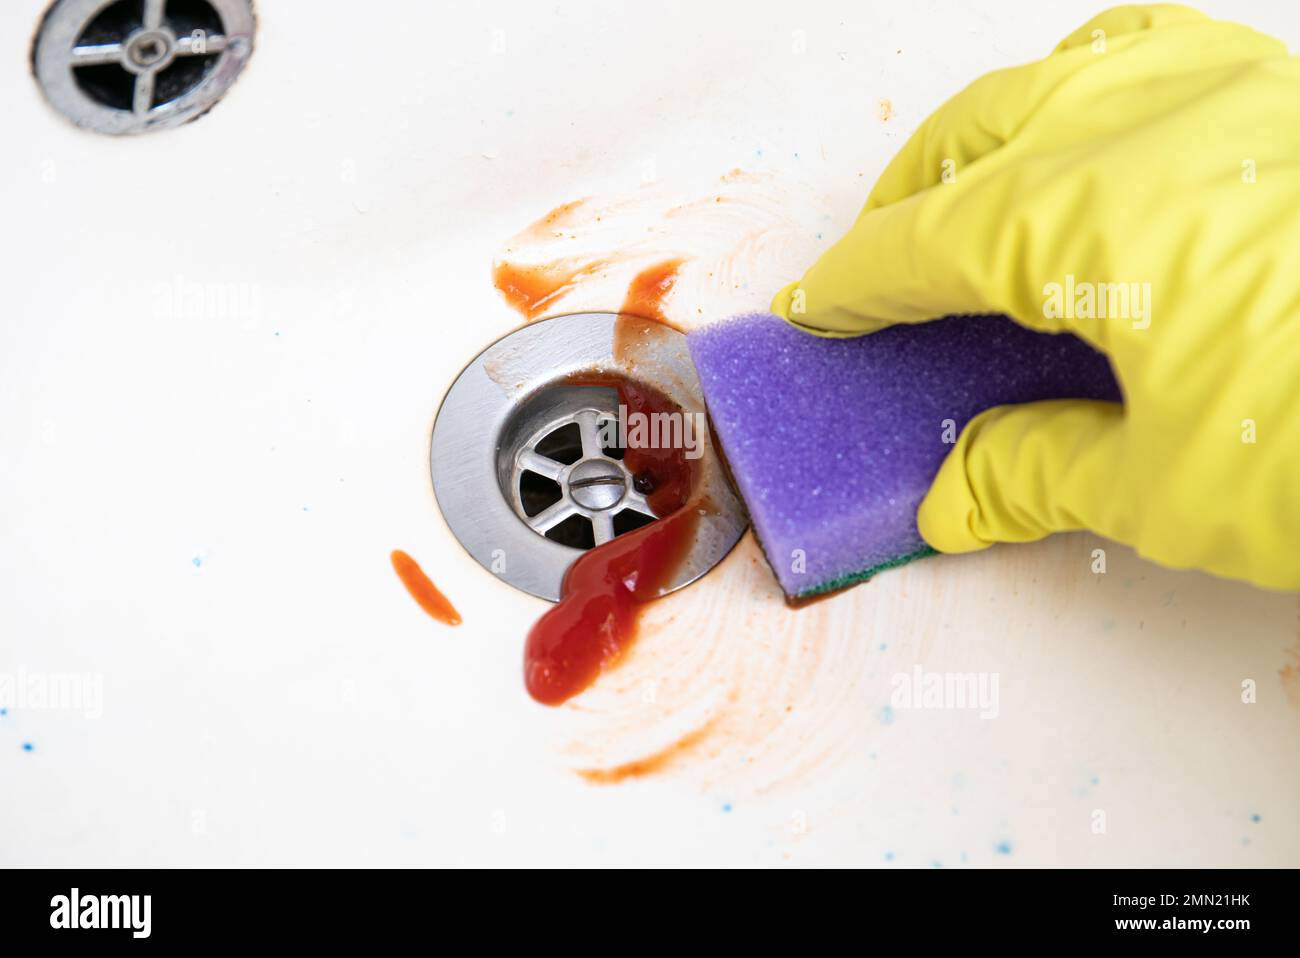 Close up view of woman hand cleaning sink with tomato ketchup, scrubbing with cleaning sponge. Alternative lifestyle concept. Stock Photo